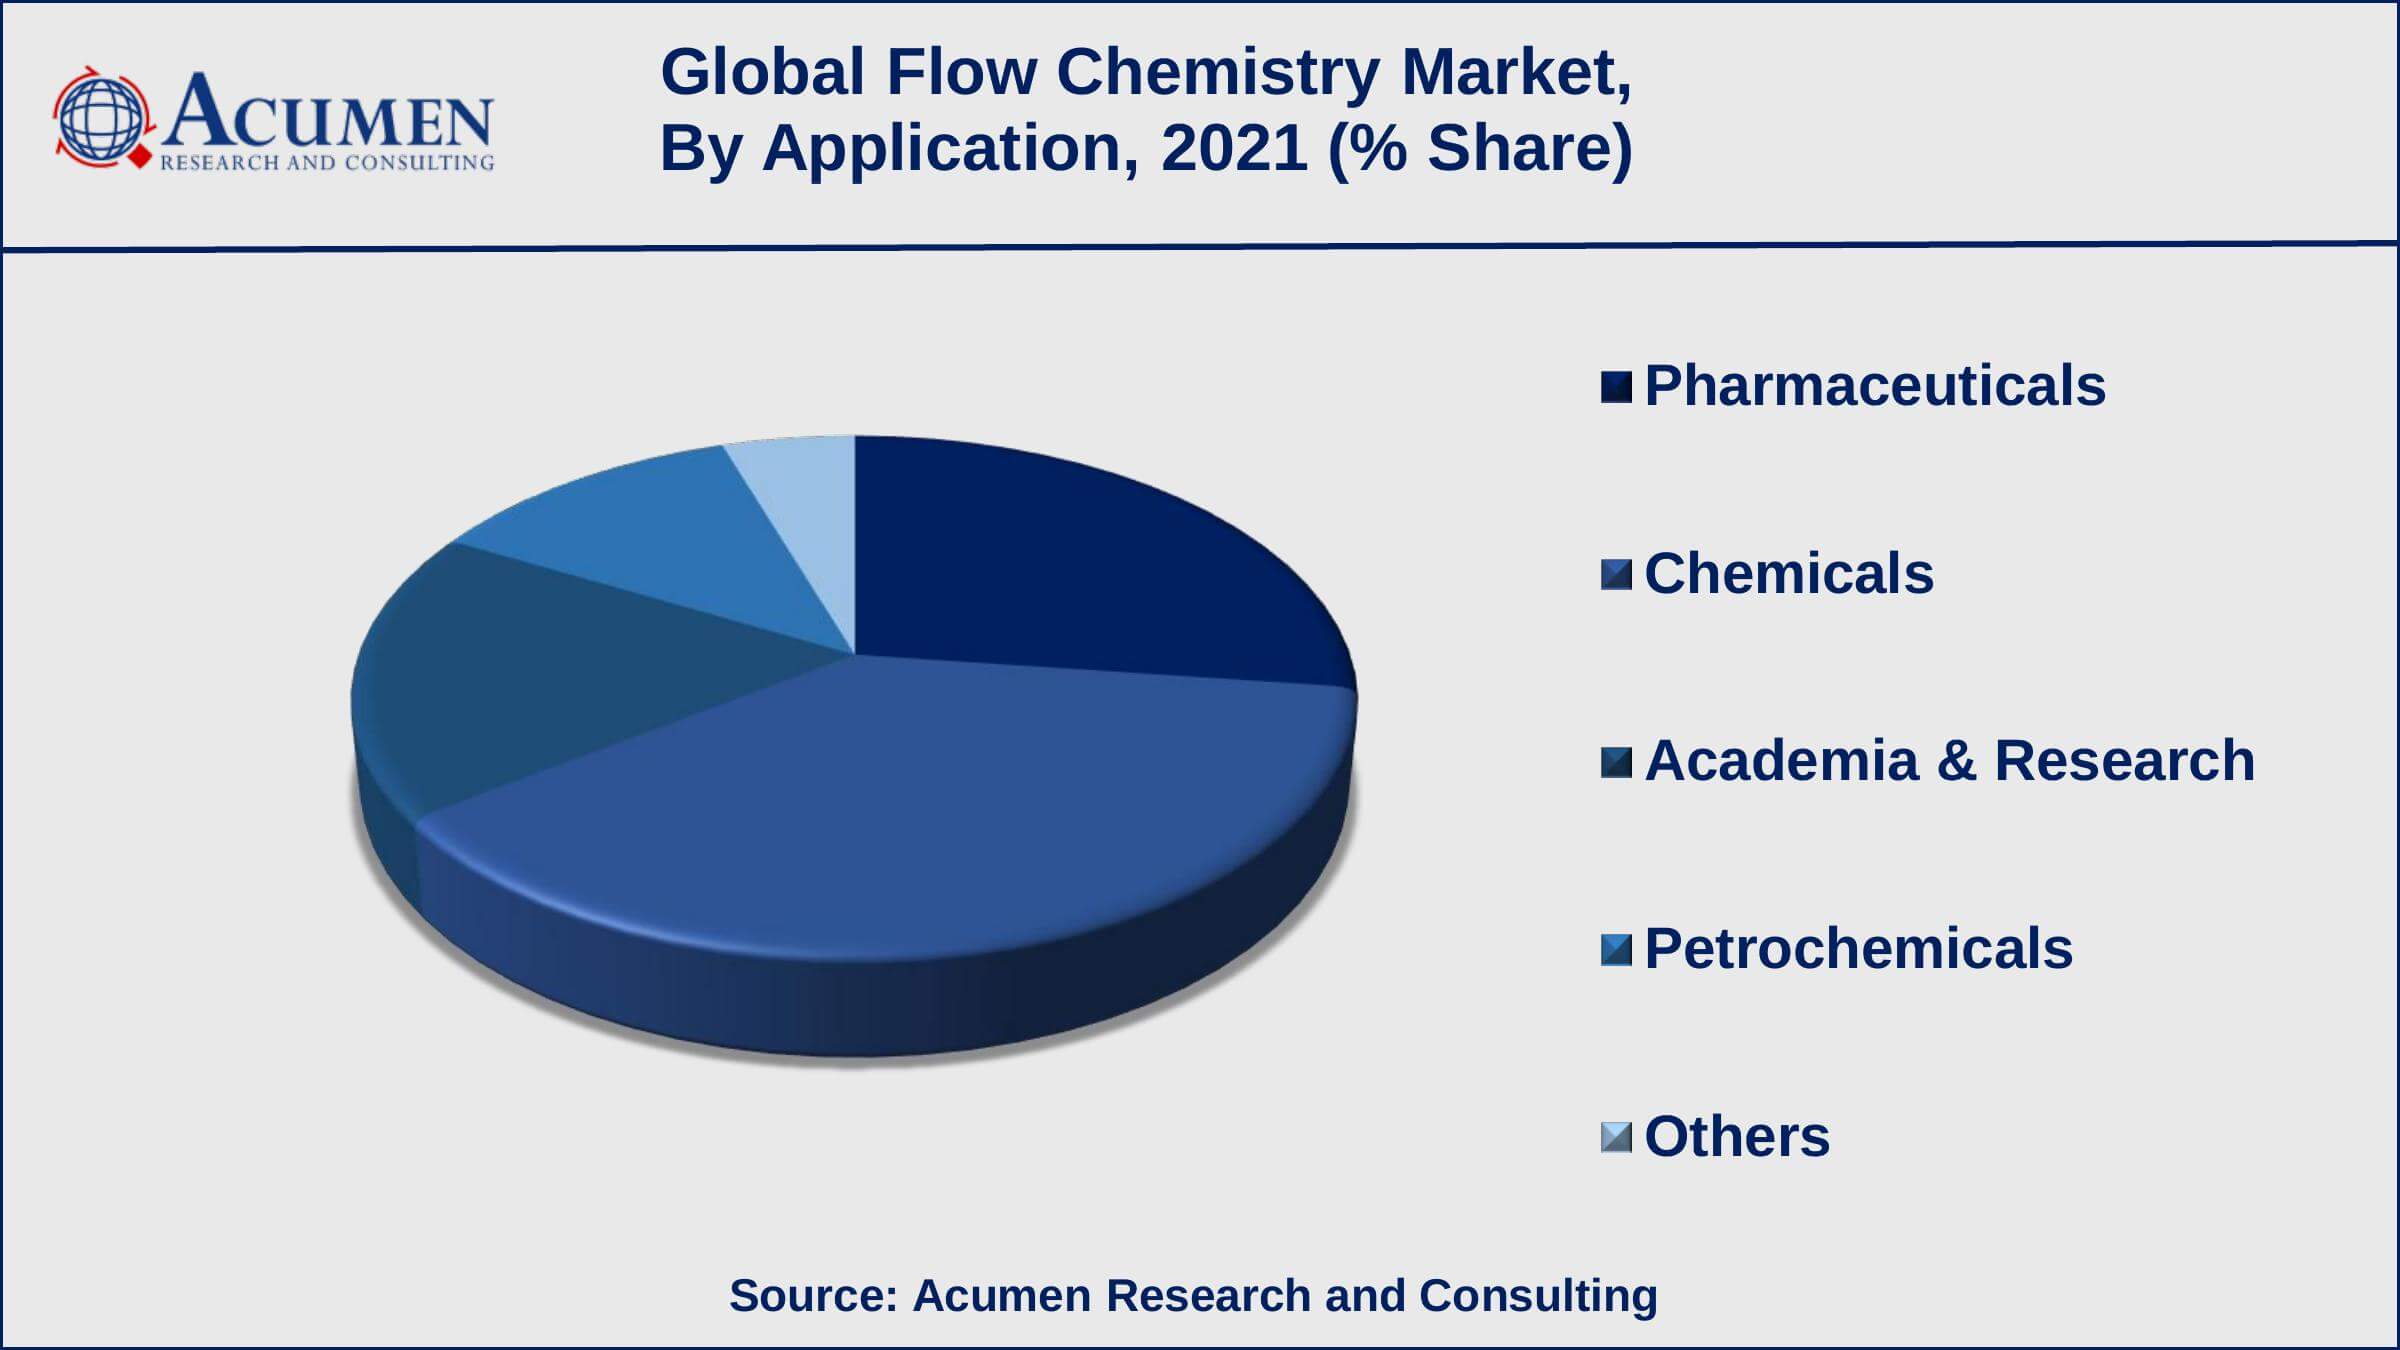 Among applications, chemicals accounted for USD 547 million in 2021